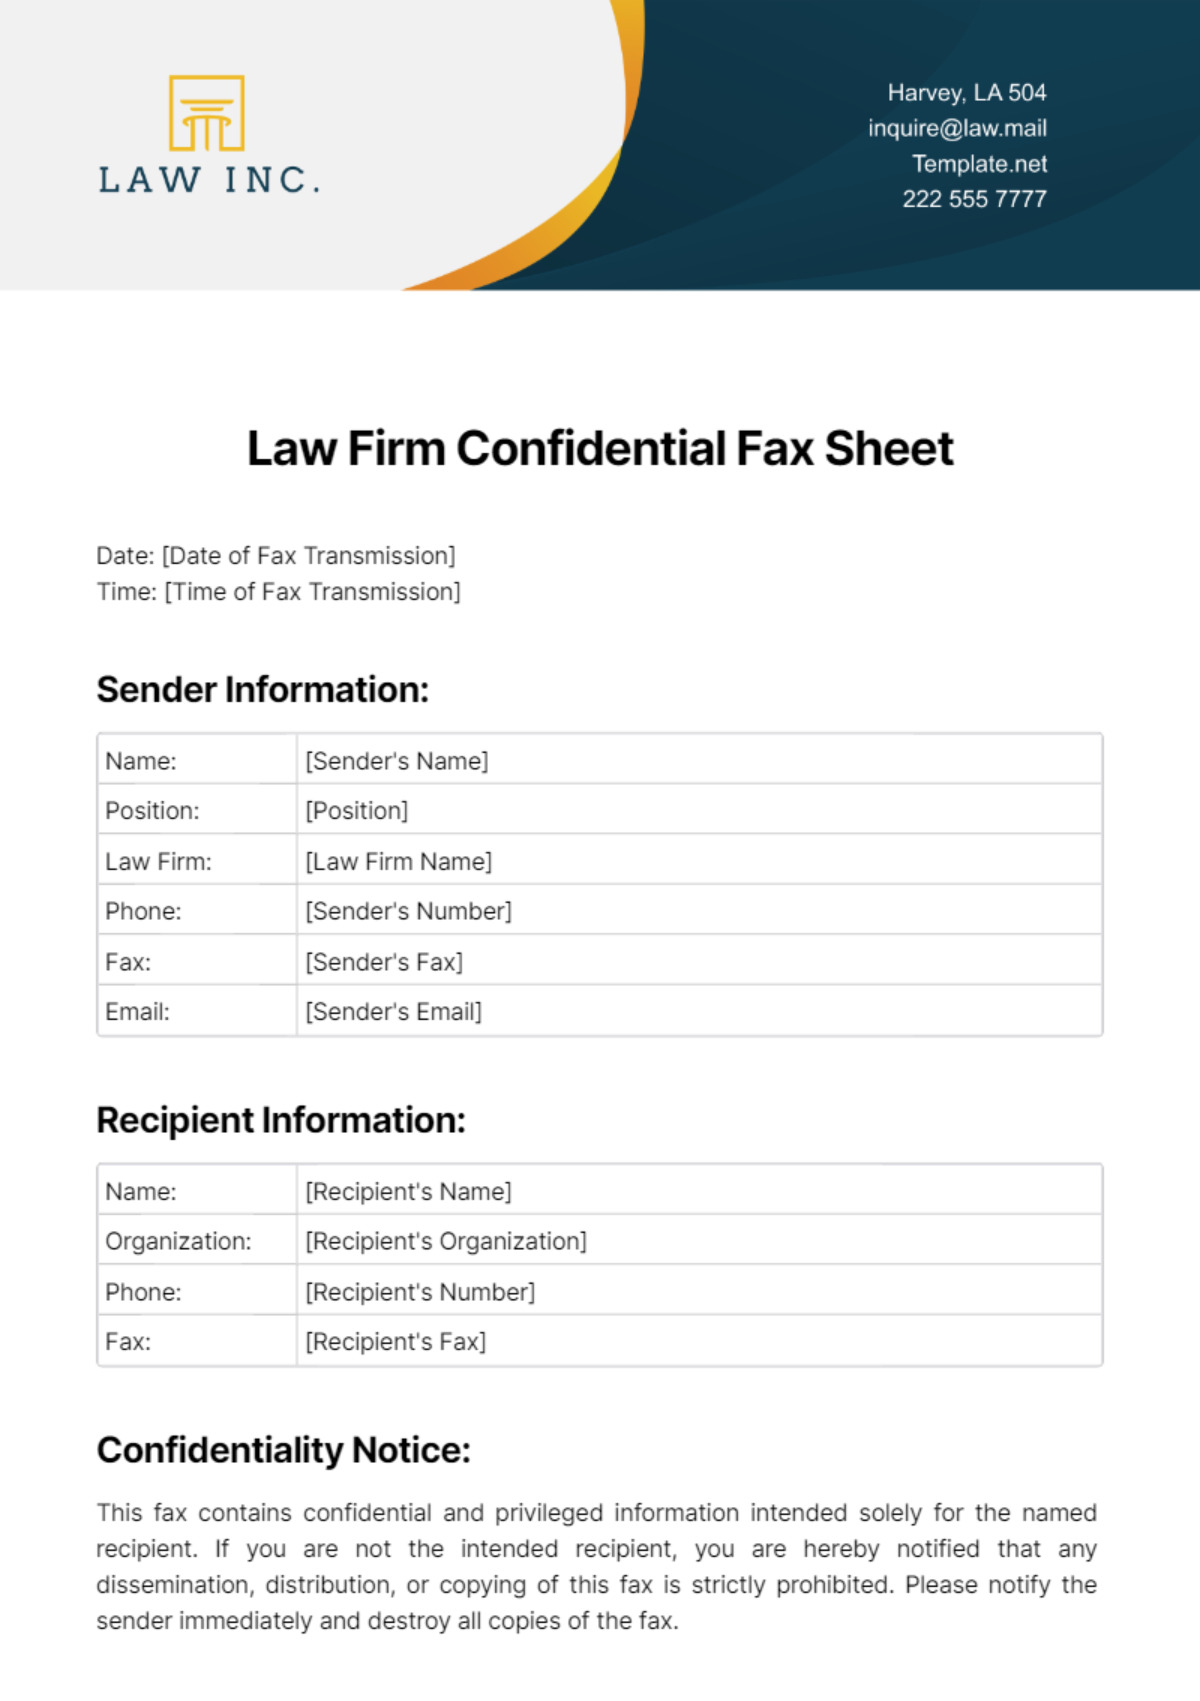 Law Firm Confidential Fax Sheet Template